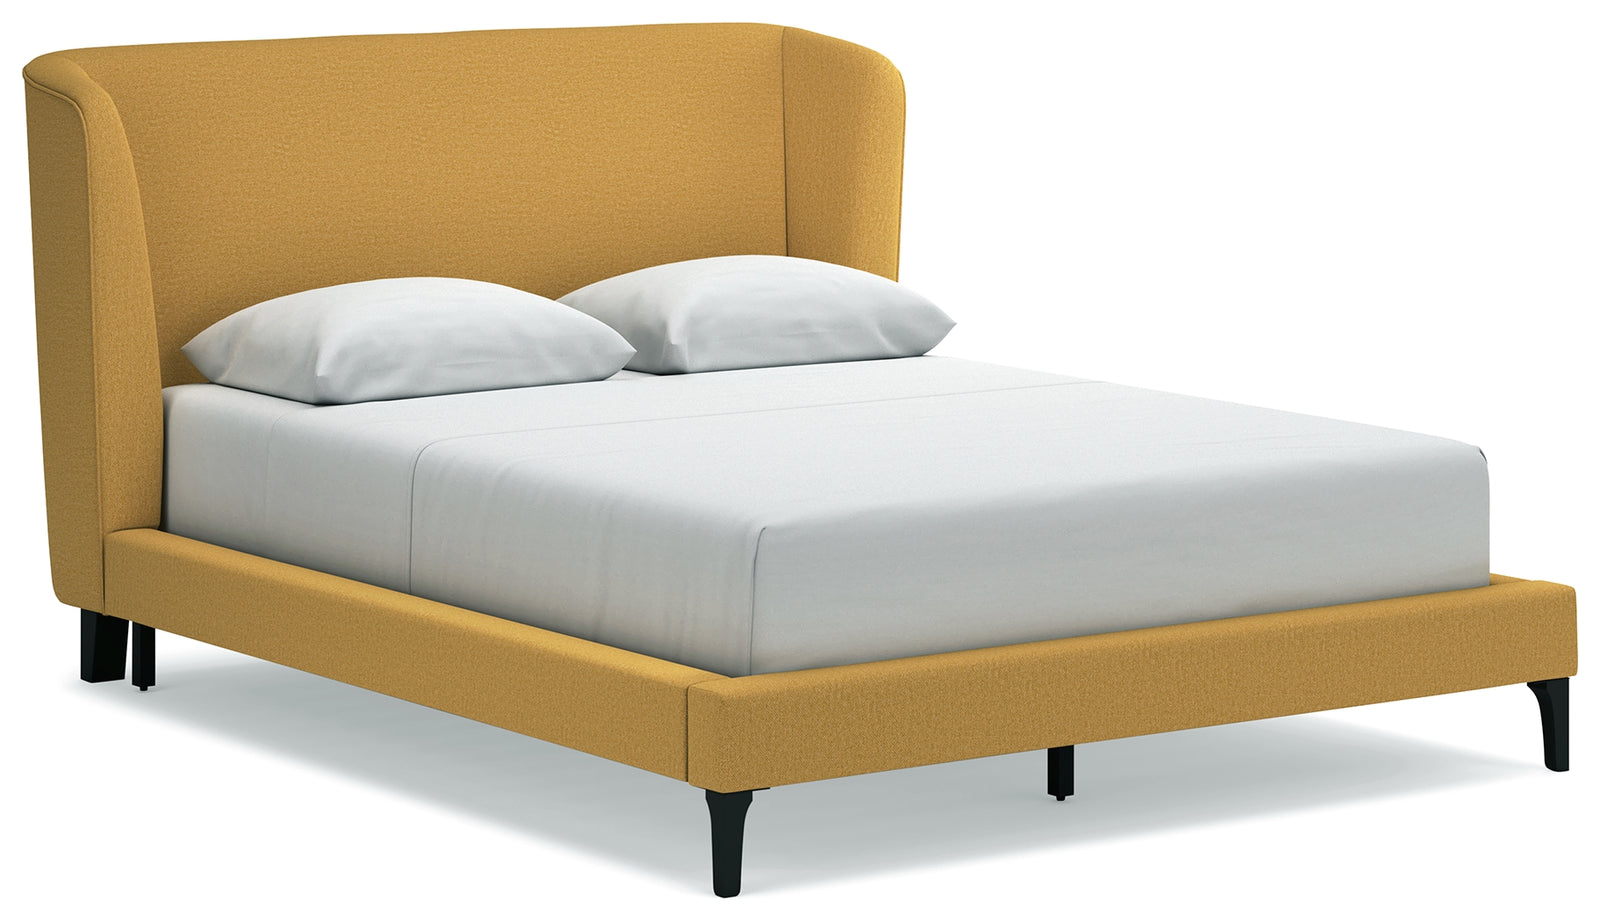 Maloken Mustard Queen Upholstered Bed With Roll Slats